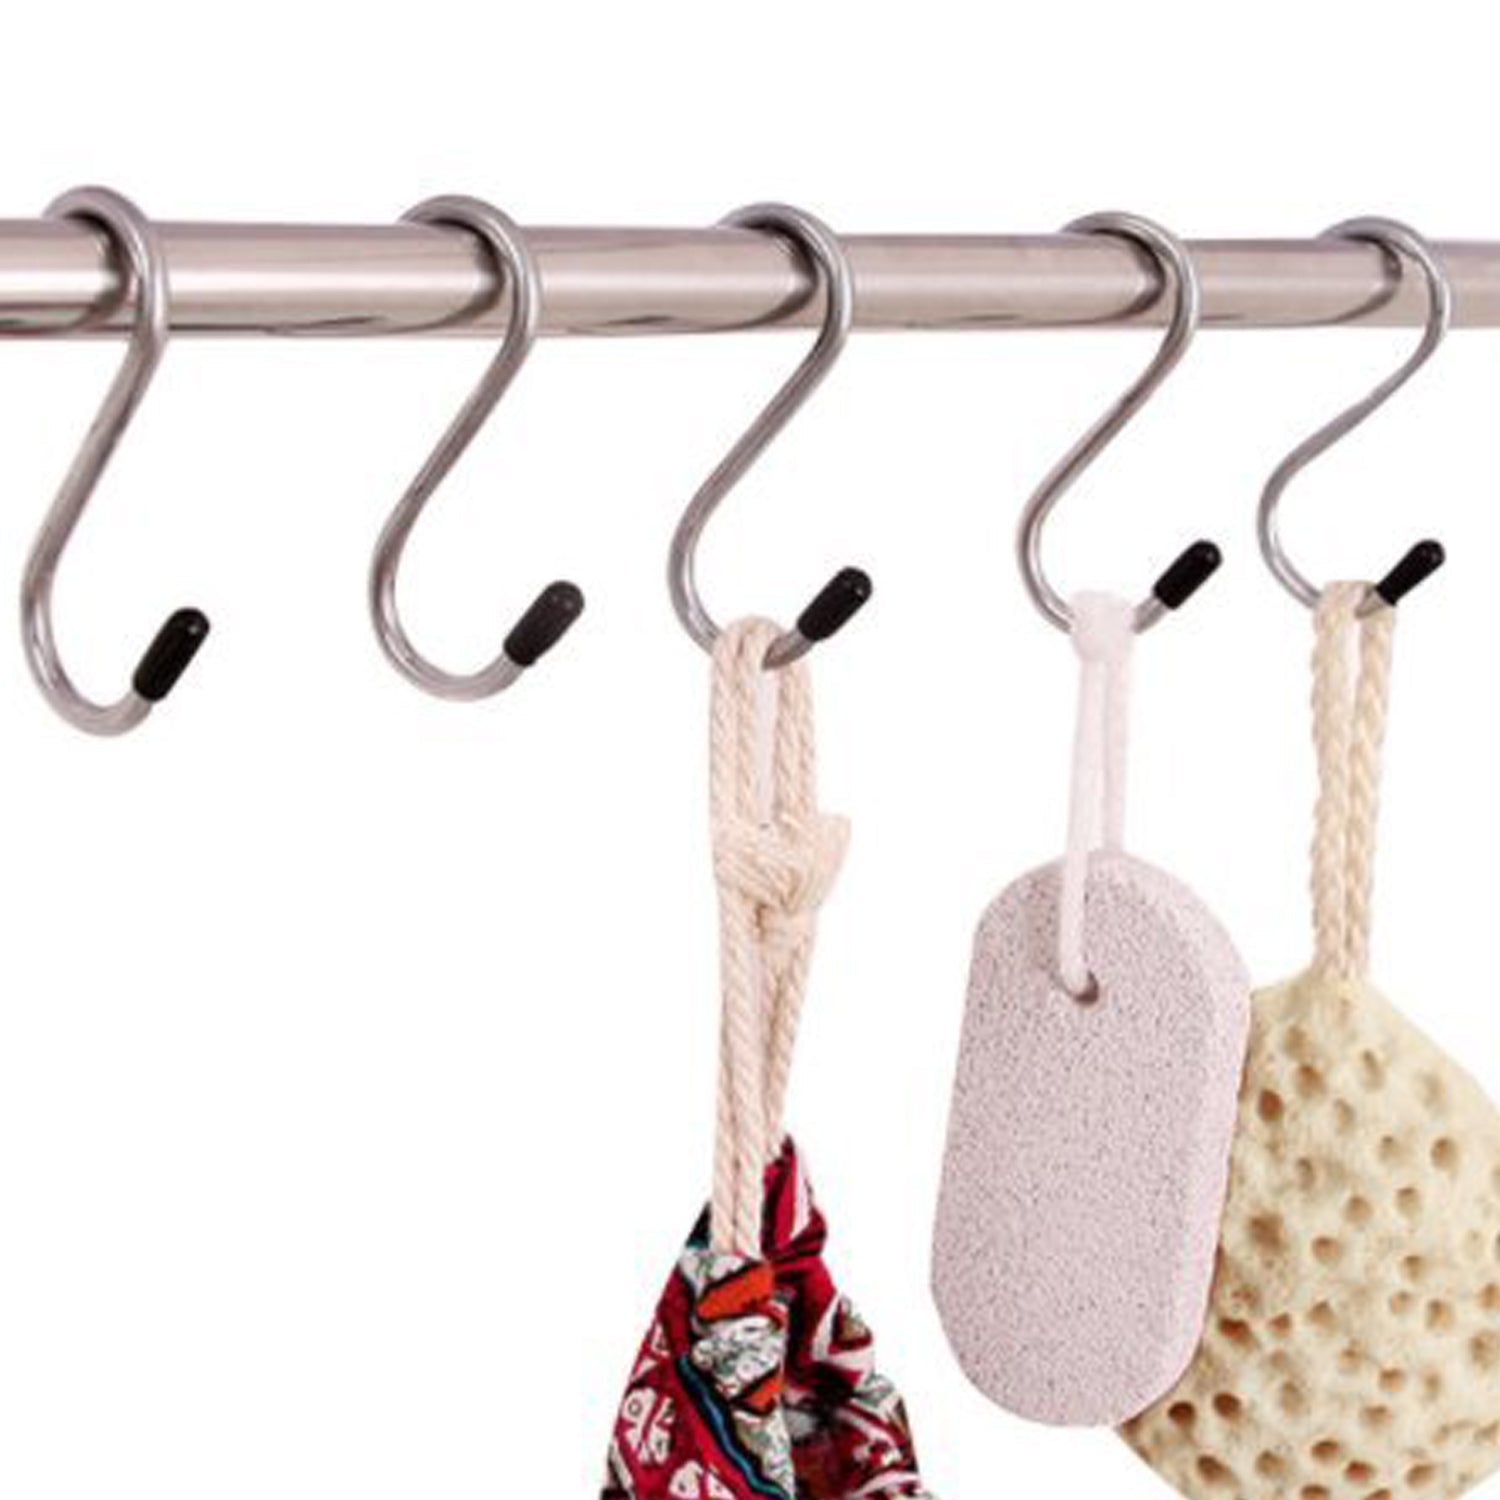 6120 6 Pc S Hanging Hook used in all kinds of places for hanging purposes on walls of such items and materials etc. DeoDap